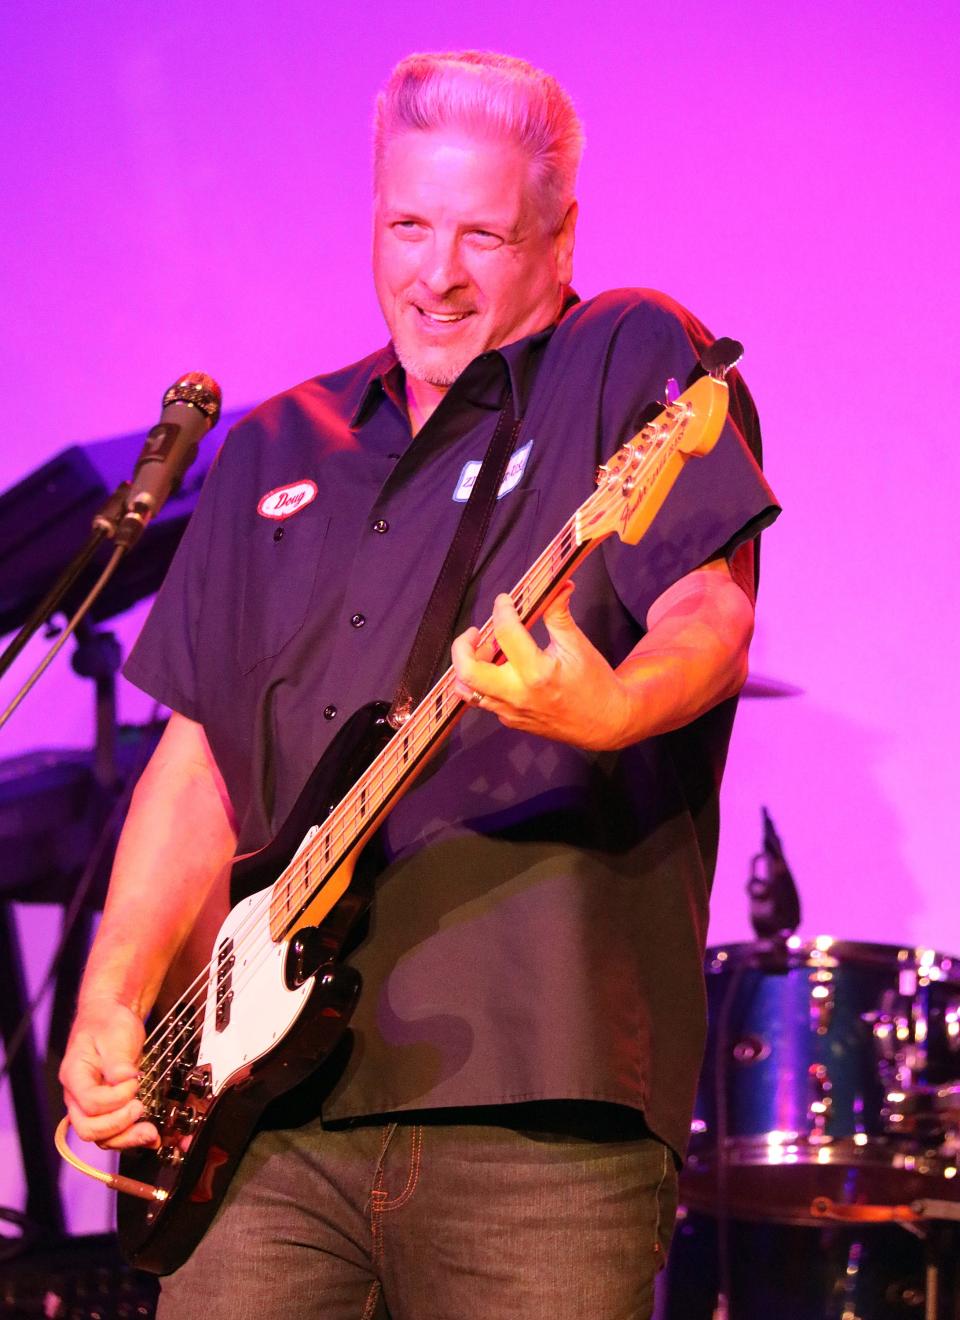 Brian Hulten plays bass as The Rathbones reunite for a special concert at xBk Live, 1159 24th St. in Des Moines, on Friday, Oct. 27, to celebrate their 2023 induction into the Iowa Rock ‘n Roll Hall of Fame.